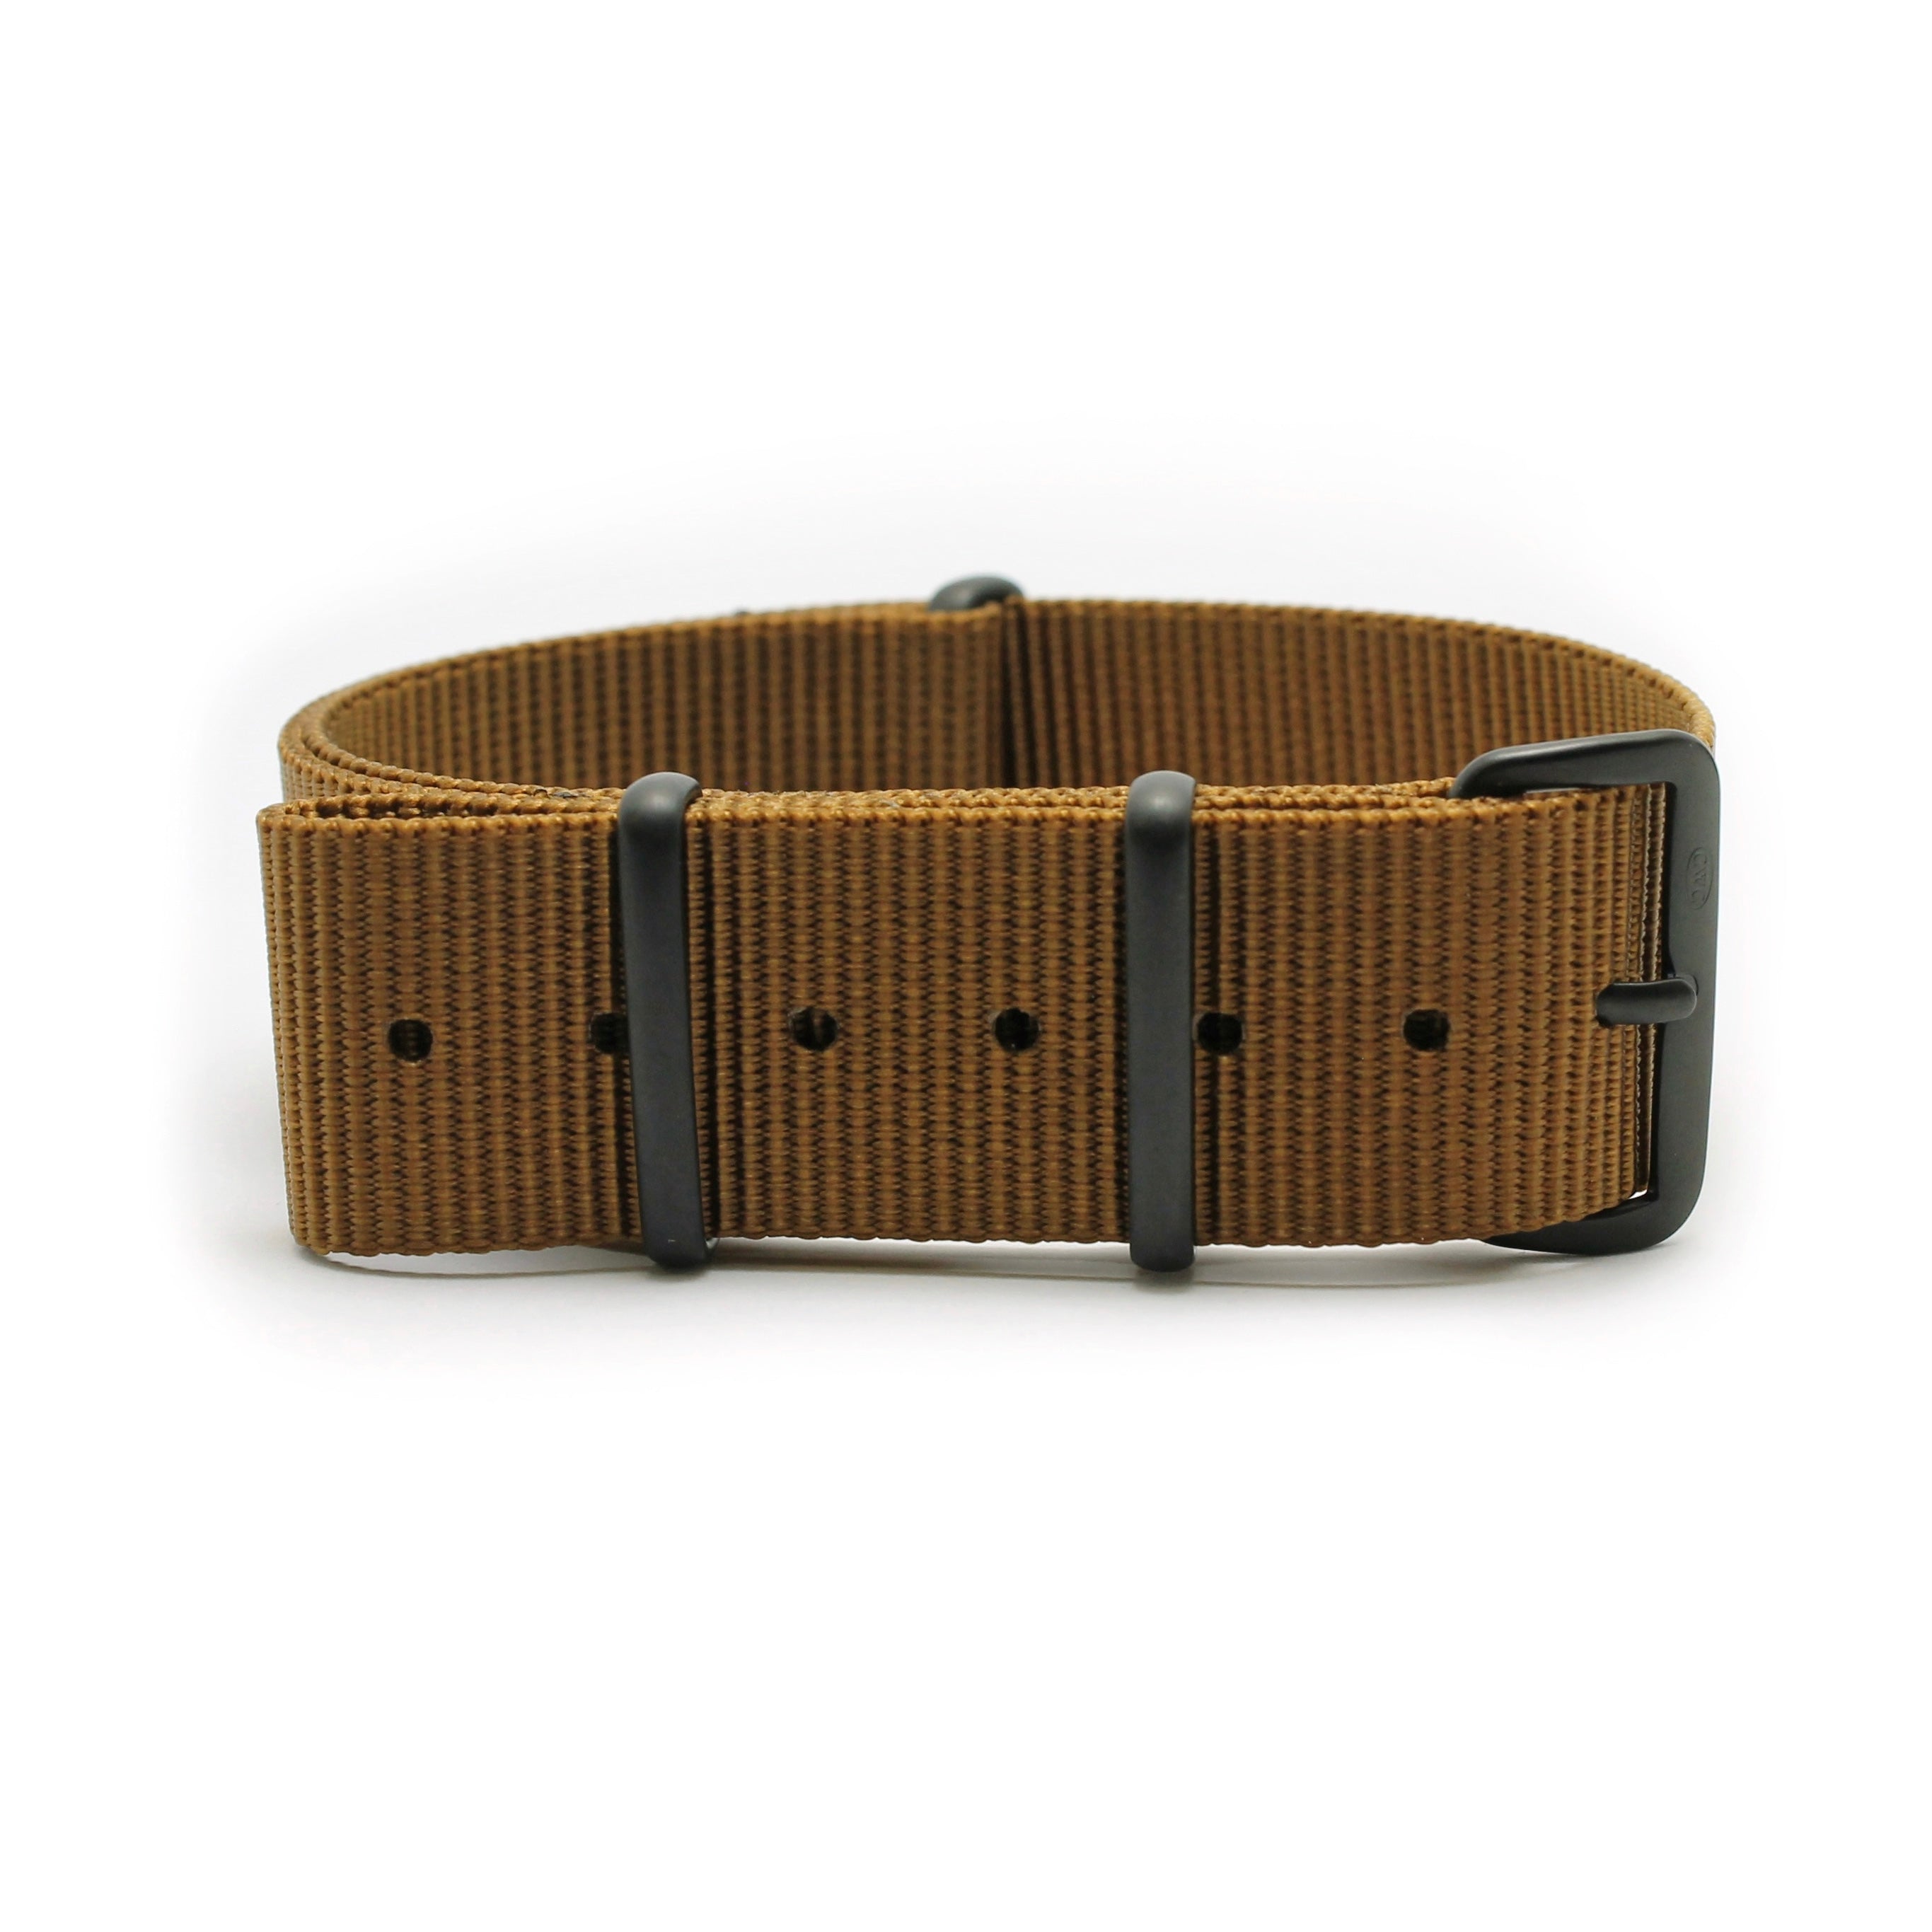 CABOT MILITARY WATCH STRAP - COYOTE WITH MATTE BLACK BUCKLE